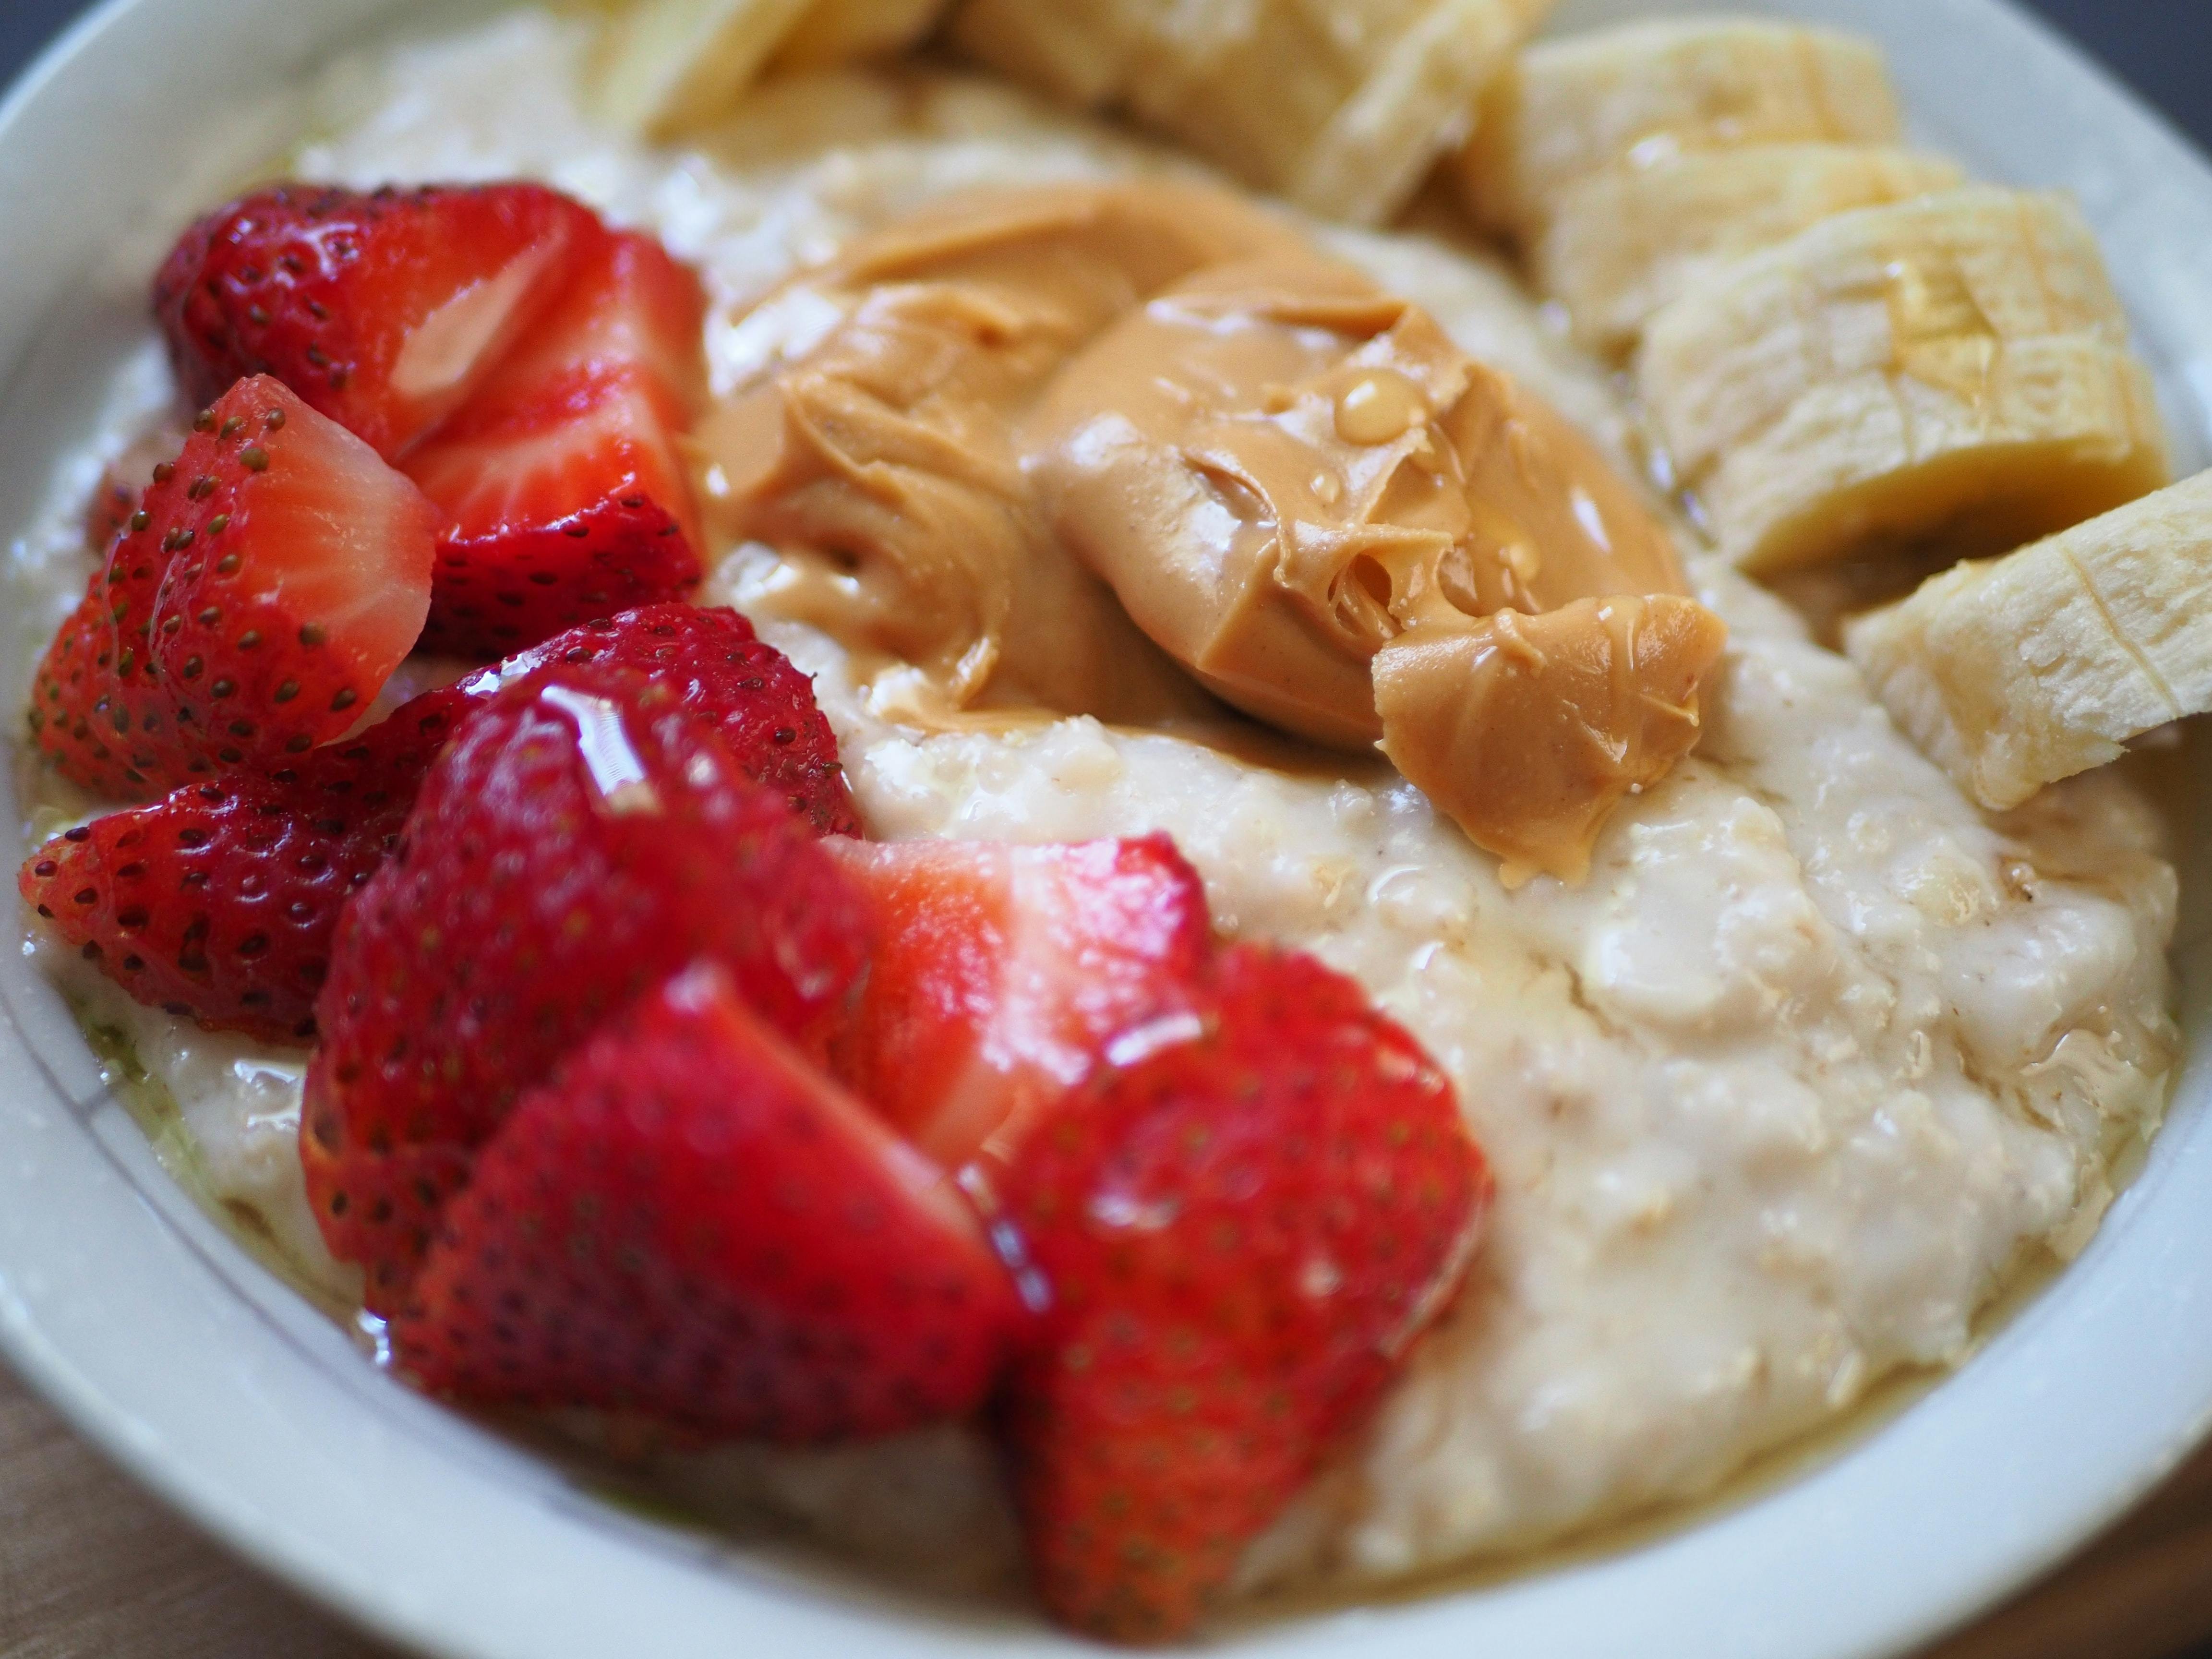 A closeup on oatmeal topped with sliced bananas, a dollop of peanut butter, and juicy red strawberries